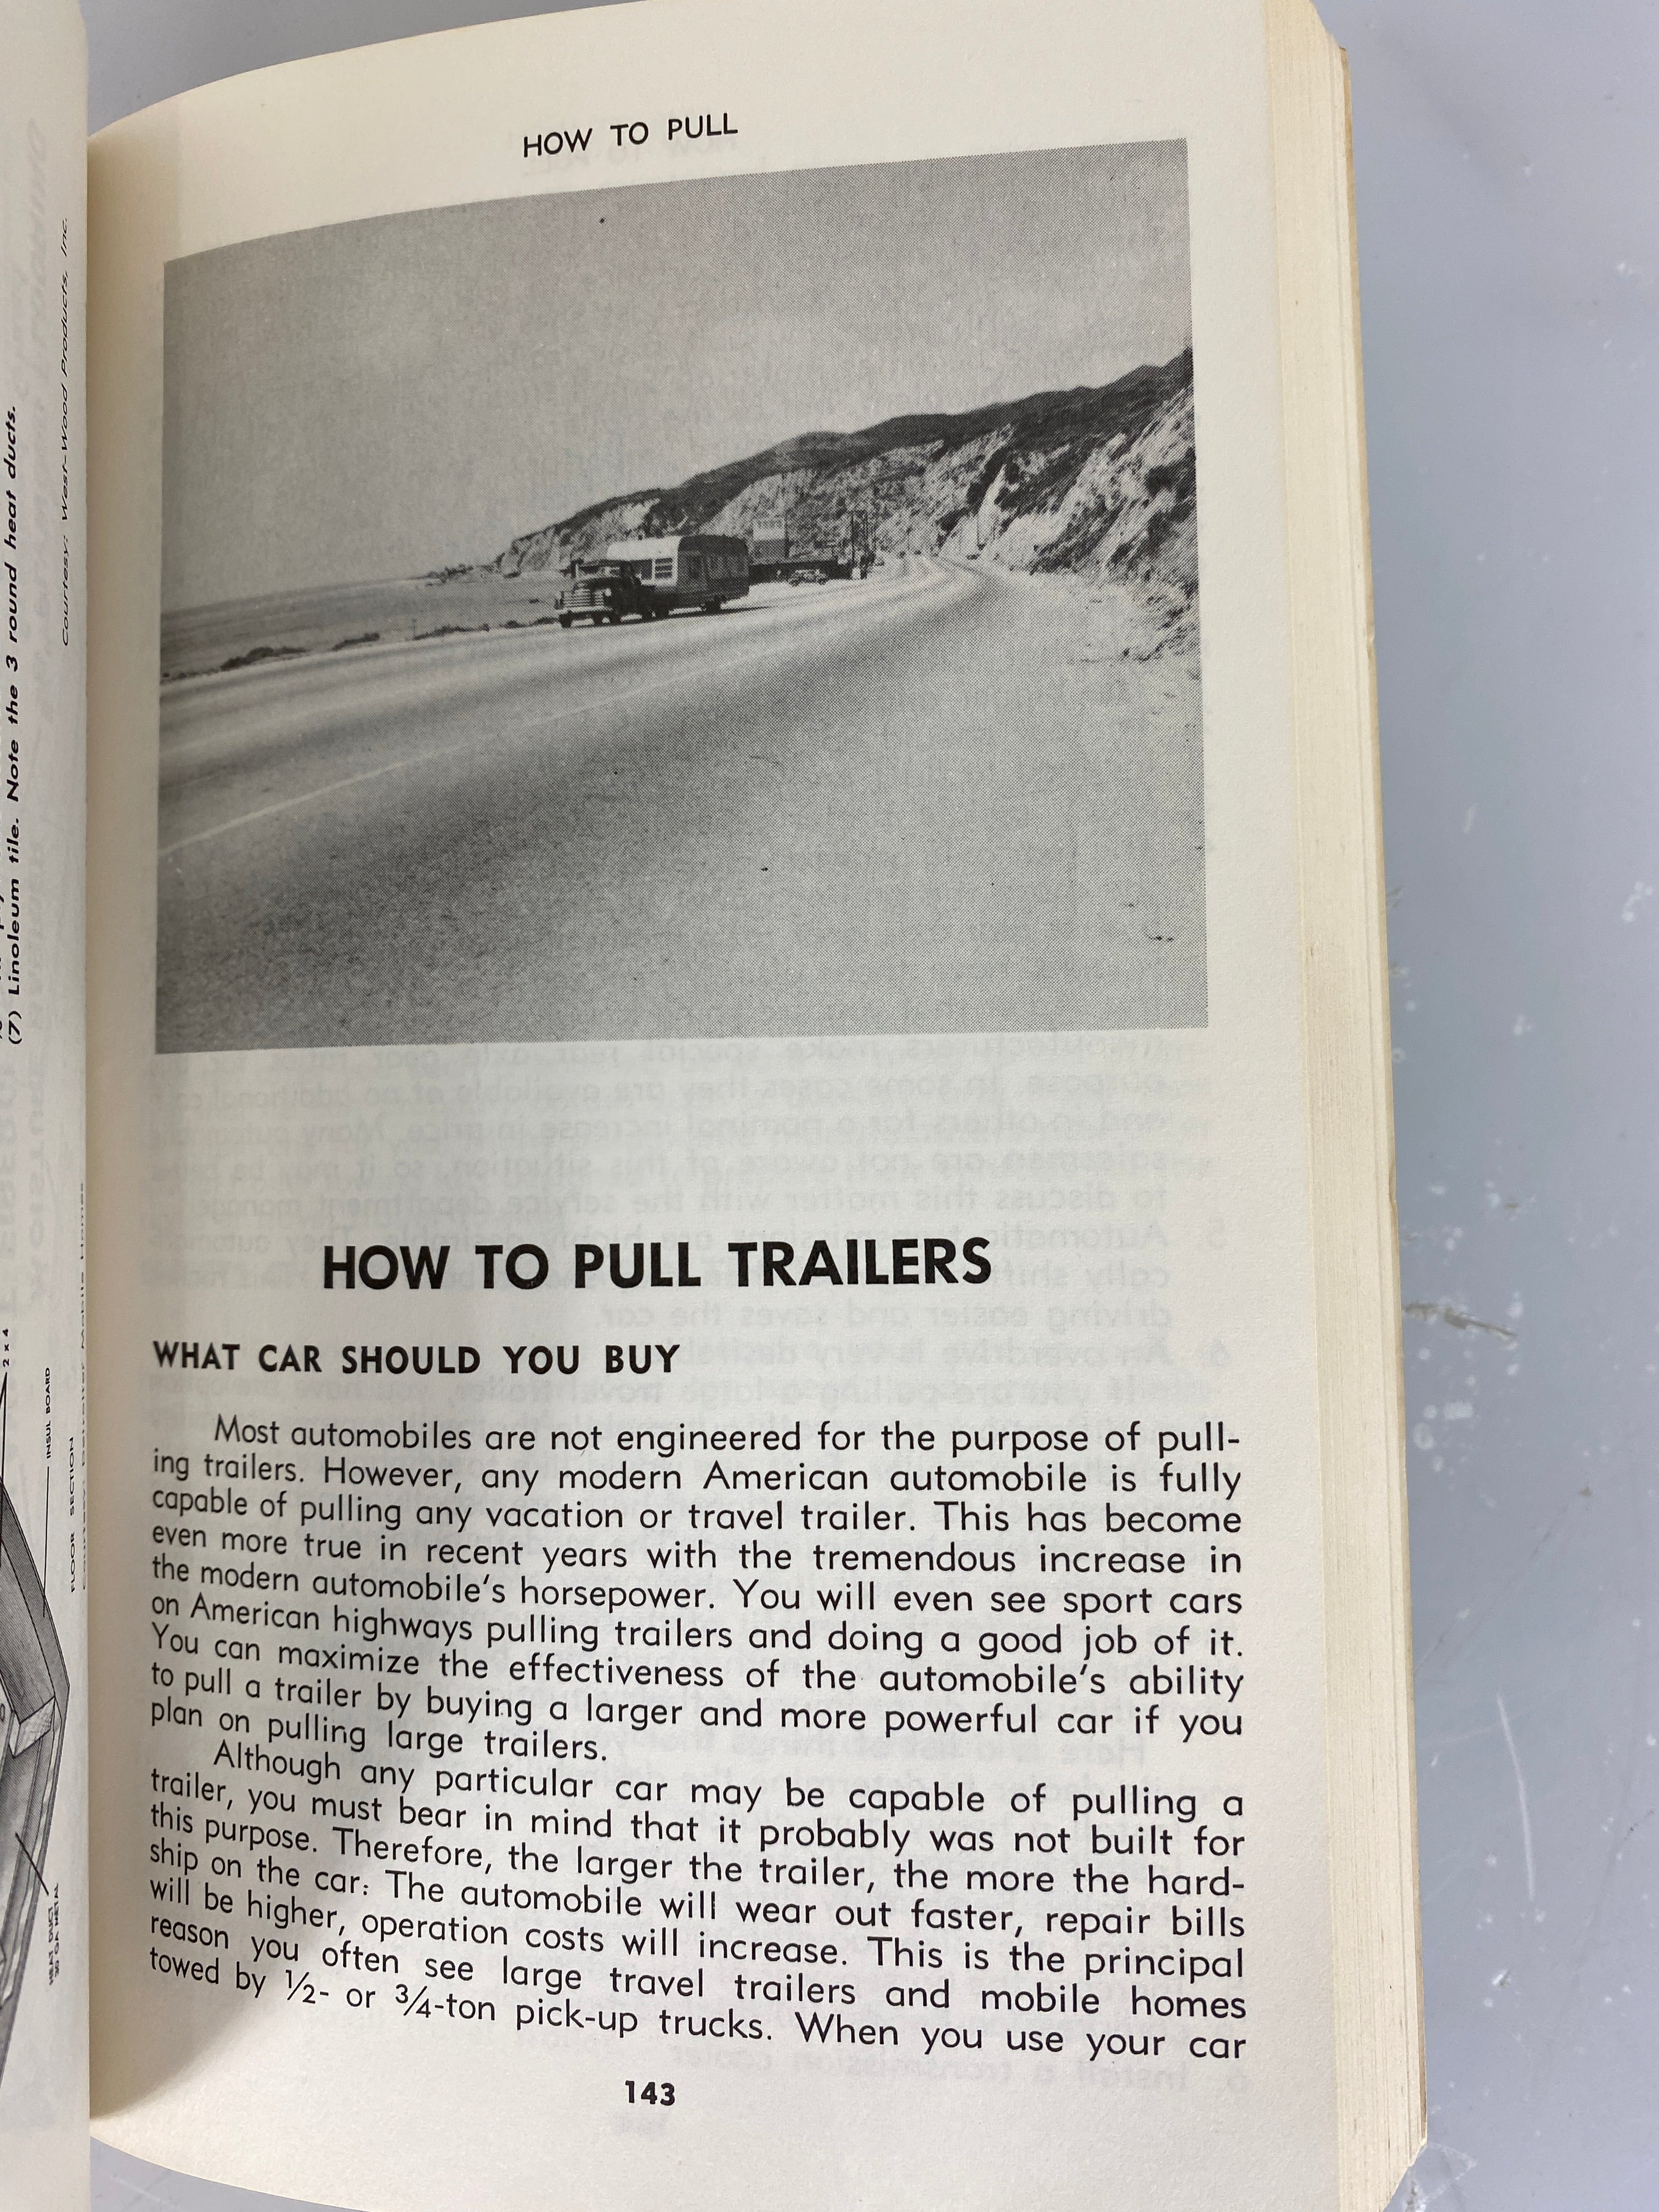 Vintage Mobile Home Manual Volume I by Robert Nulsen The Mobile Home How to Do It Book 1972 SC